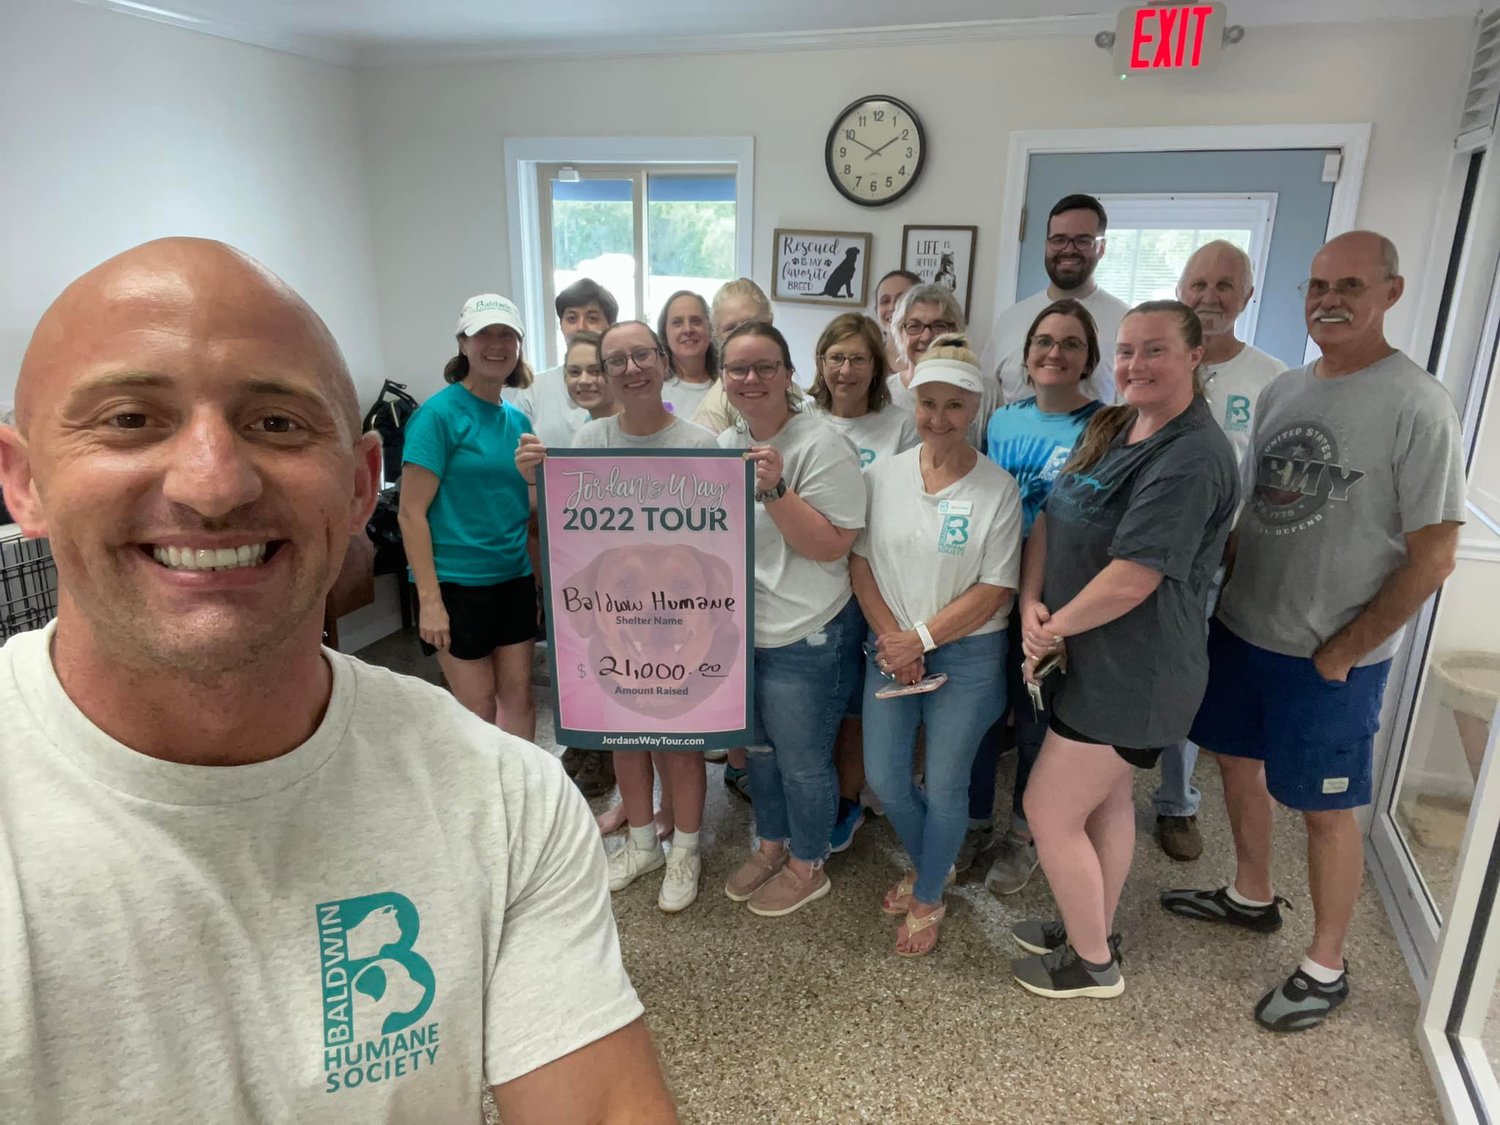 Jordan's Way Founder and CEO Kris Rotonda, left, poses with the Baldwin Humane Society team one last time before moving on to the next shelter.